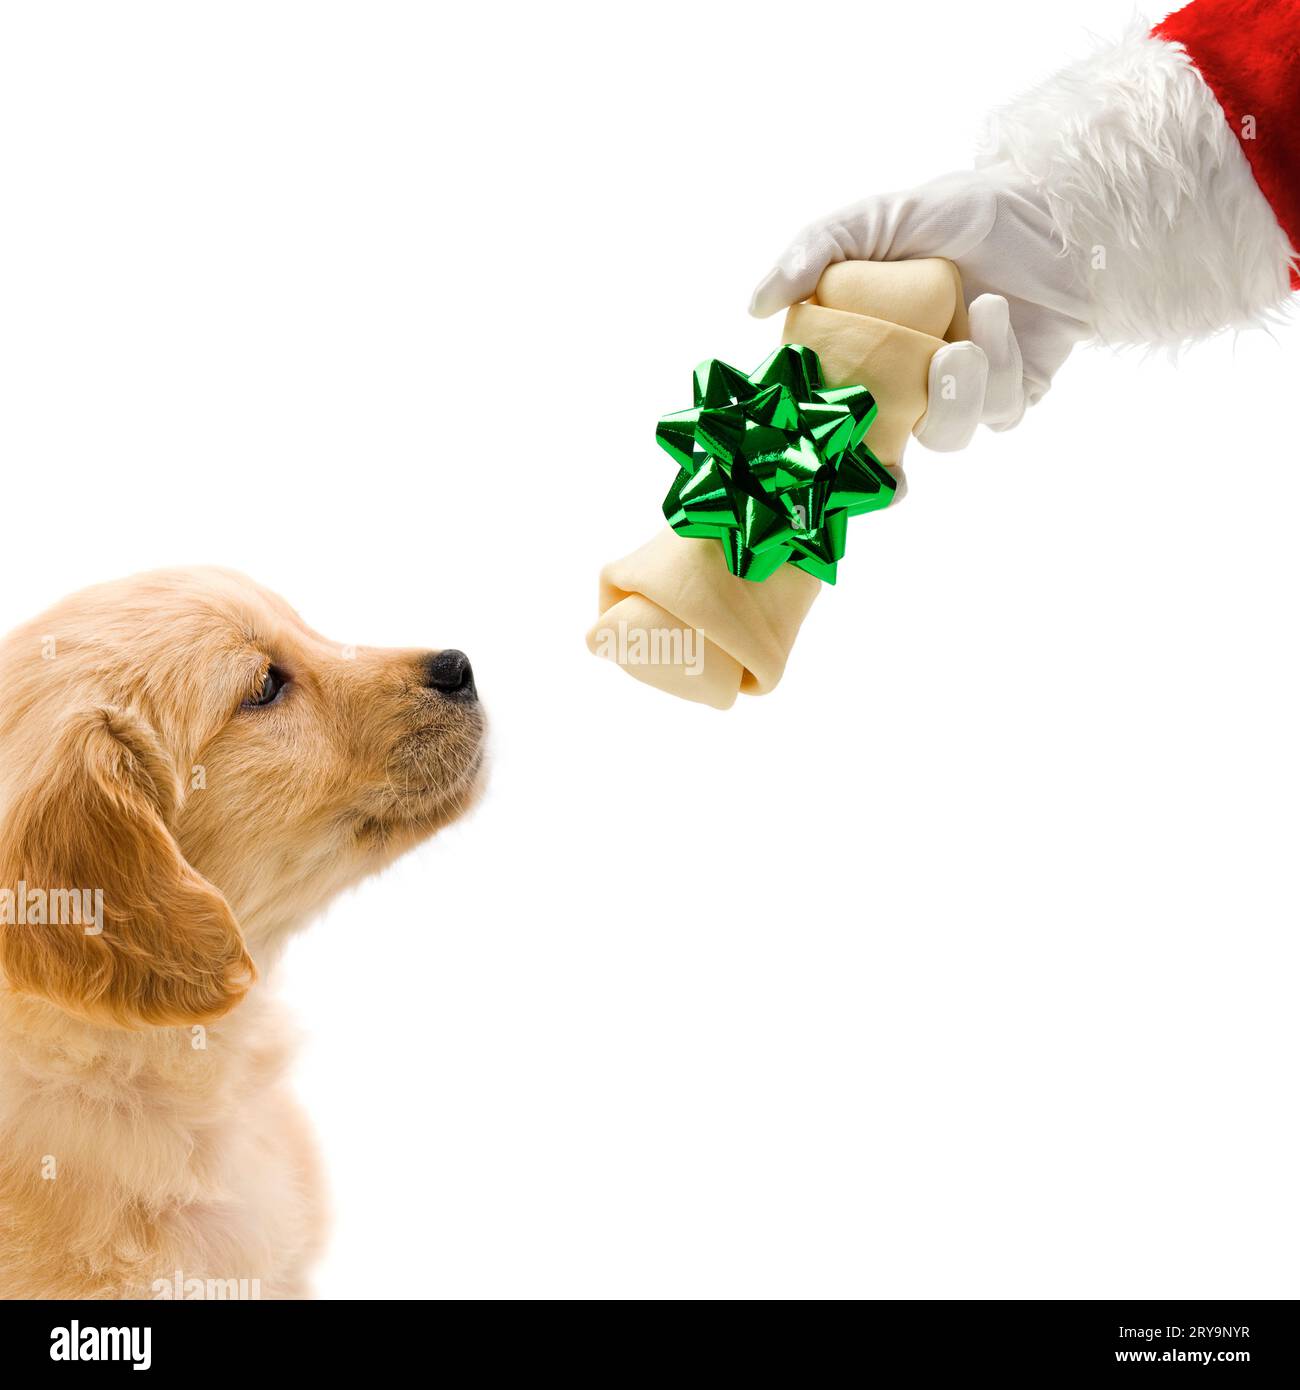 https://c8.alamy.com/comp/2RY9NYR/a-7-week-old-golden-retriever-puppy-waits-for-a-treat-patiently-as-santa-clause-holds-the-rawhide-in-his-hand-against-a-white-background-missy-2RY9NYR.jpg